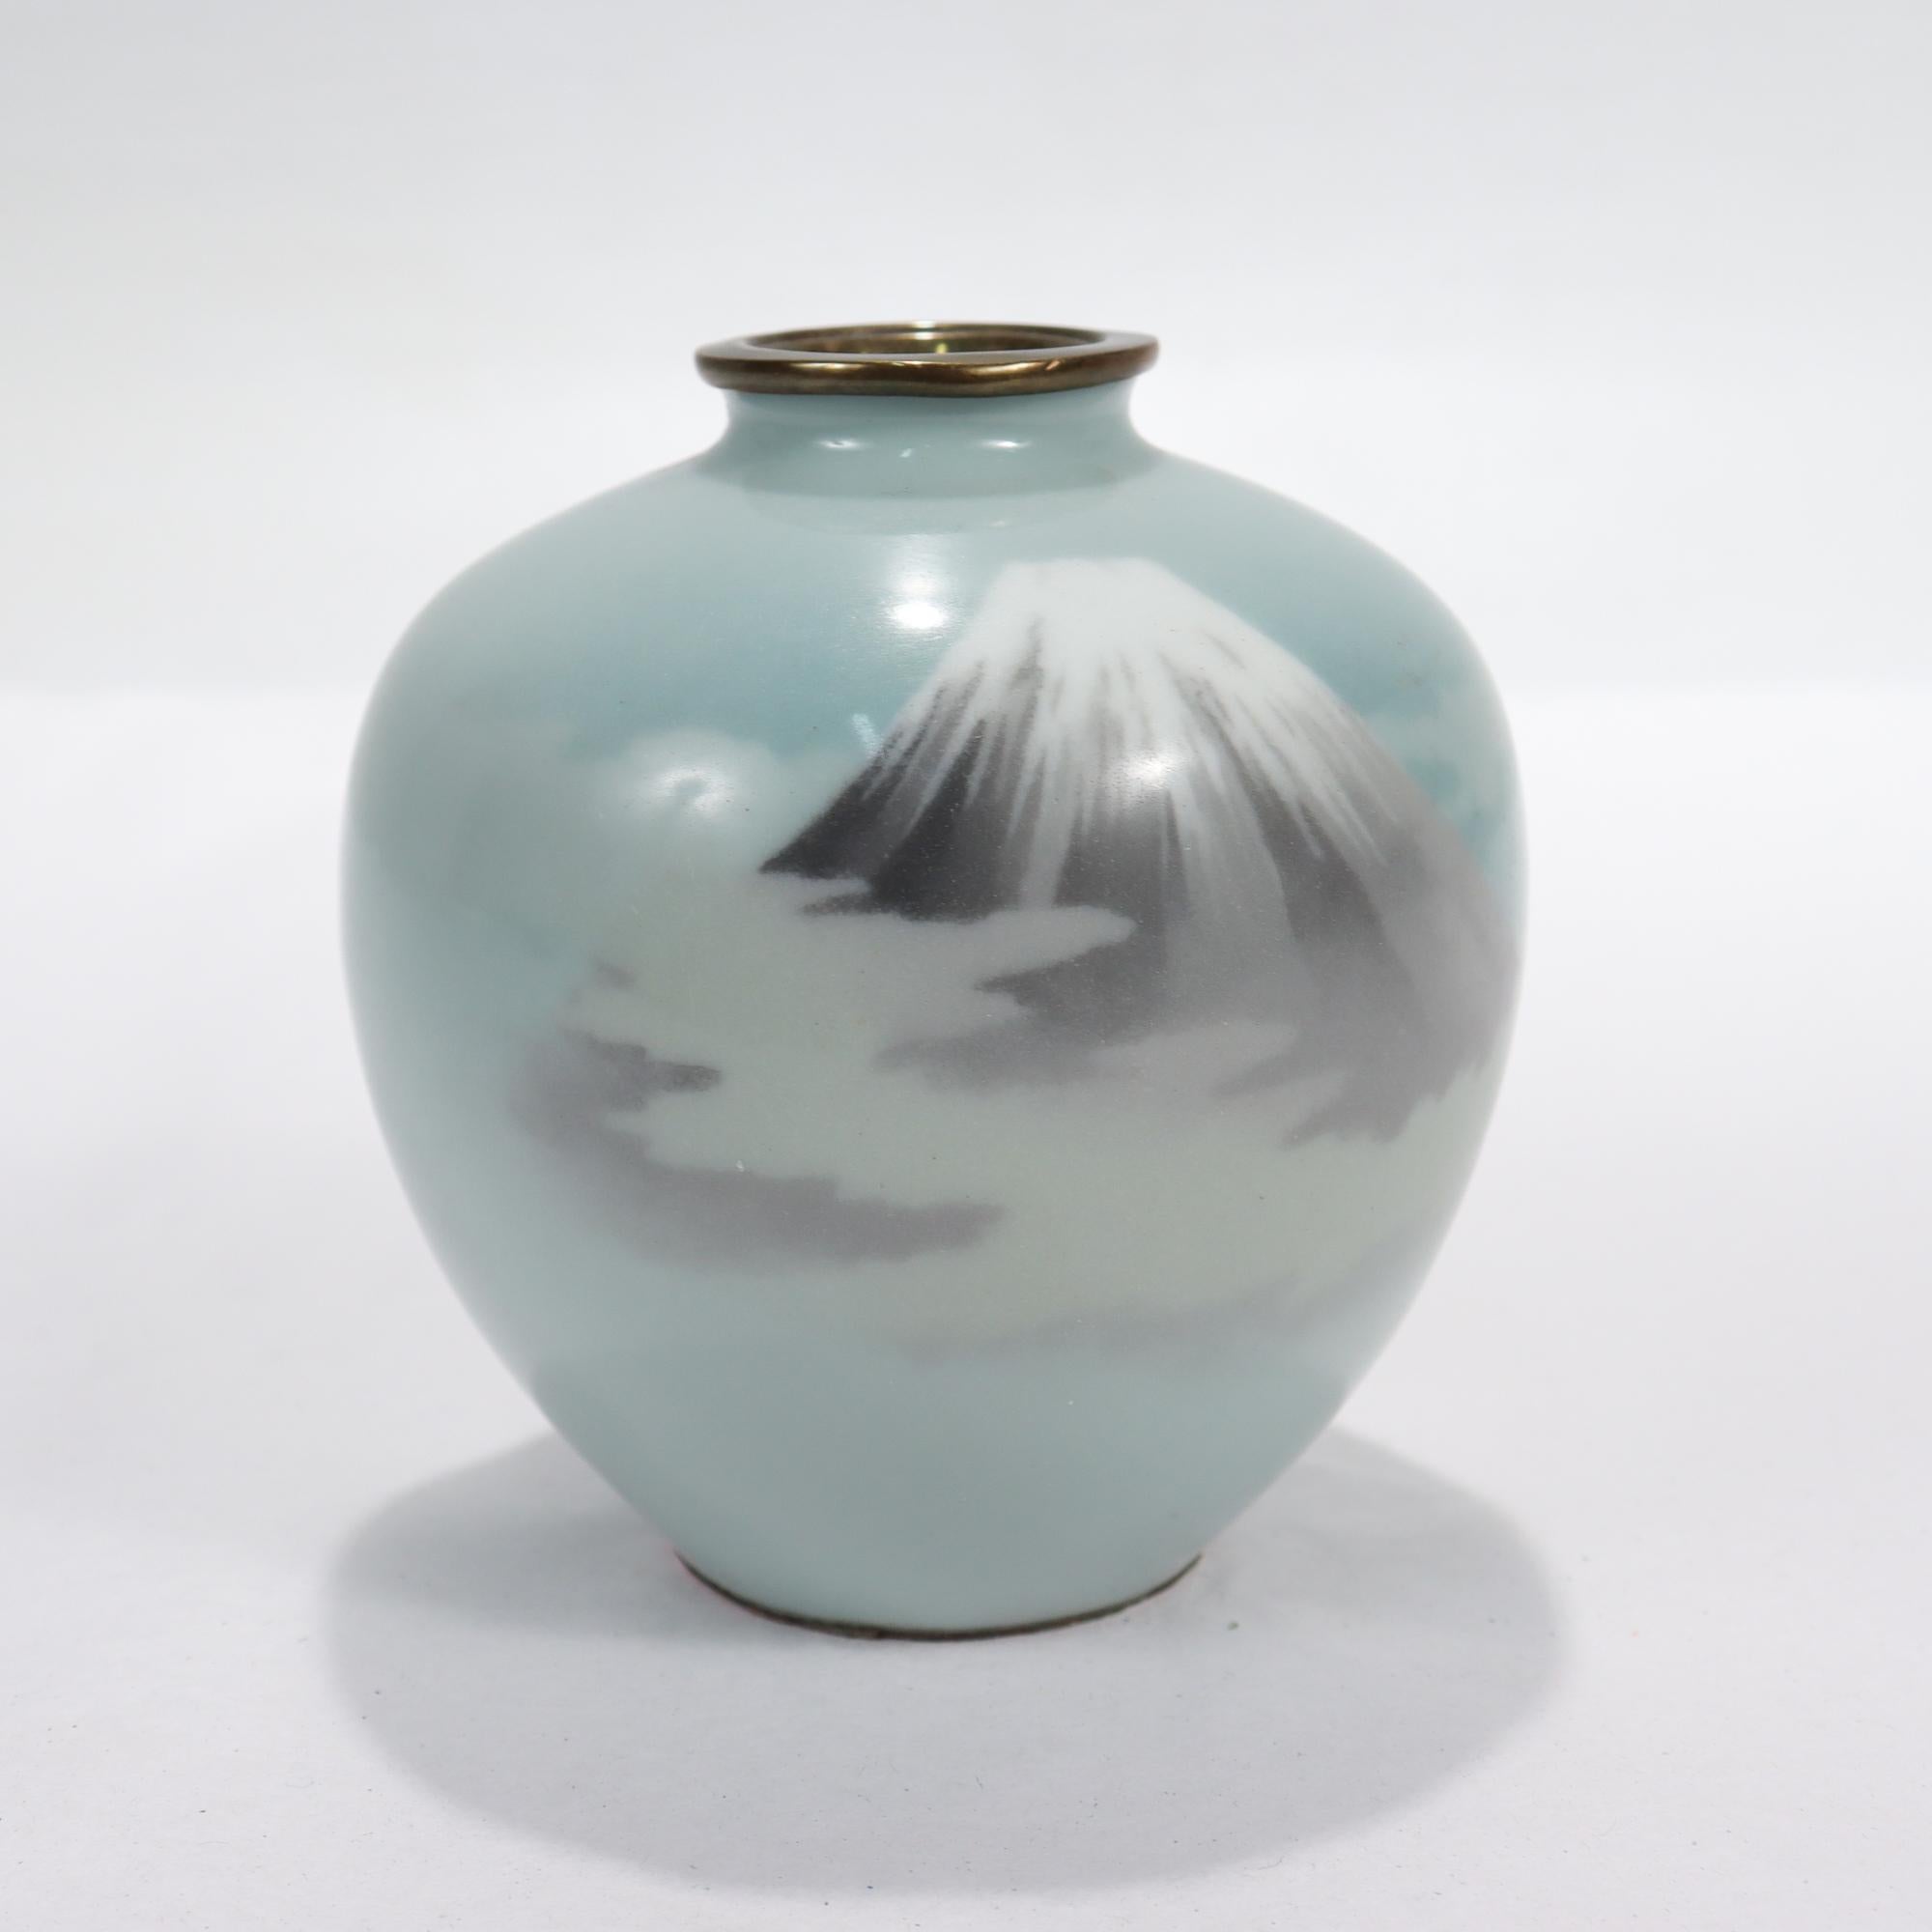 Old or Antique Diminutive Japanese Wireless Cloisonne Enamel Vase of Mt Fuji In Good Condition For Sale In Philadelphia, PA